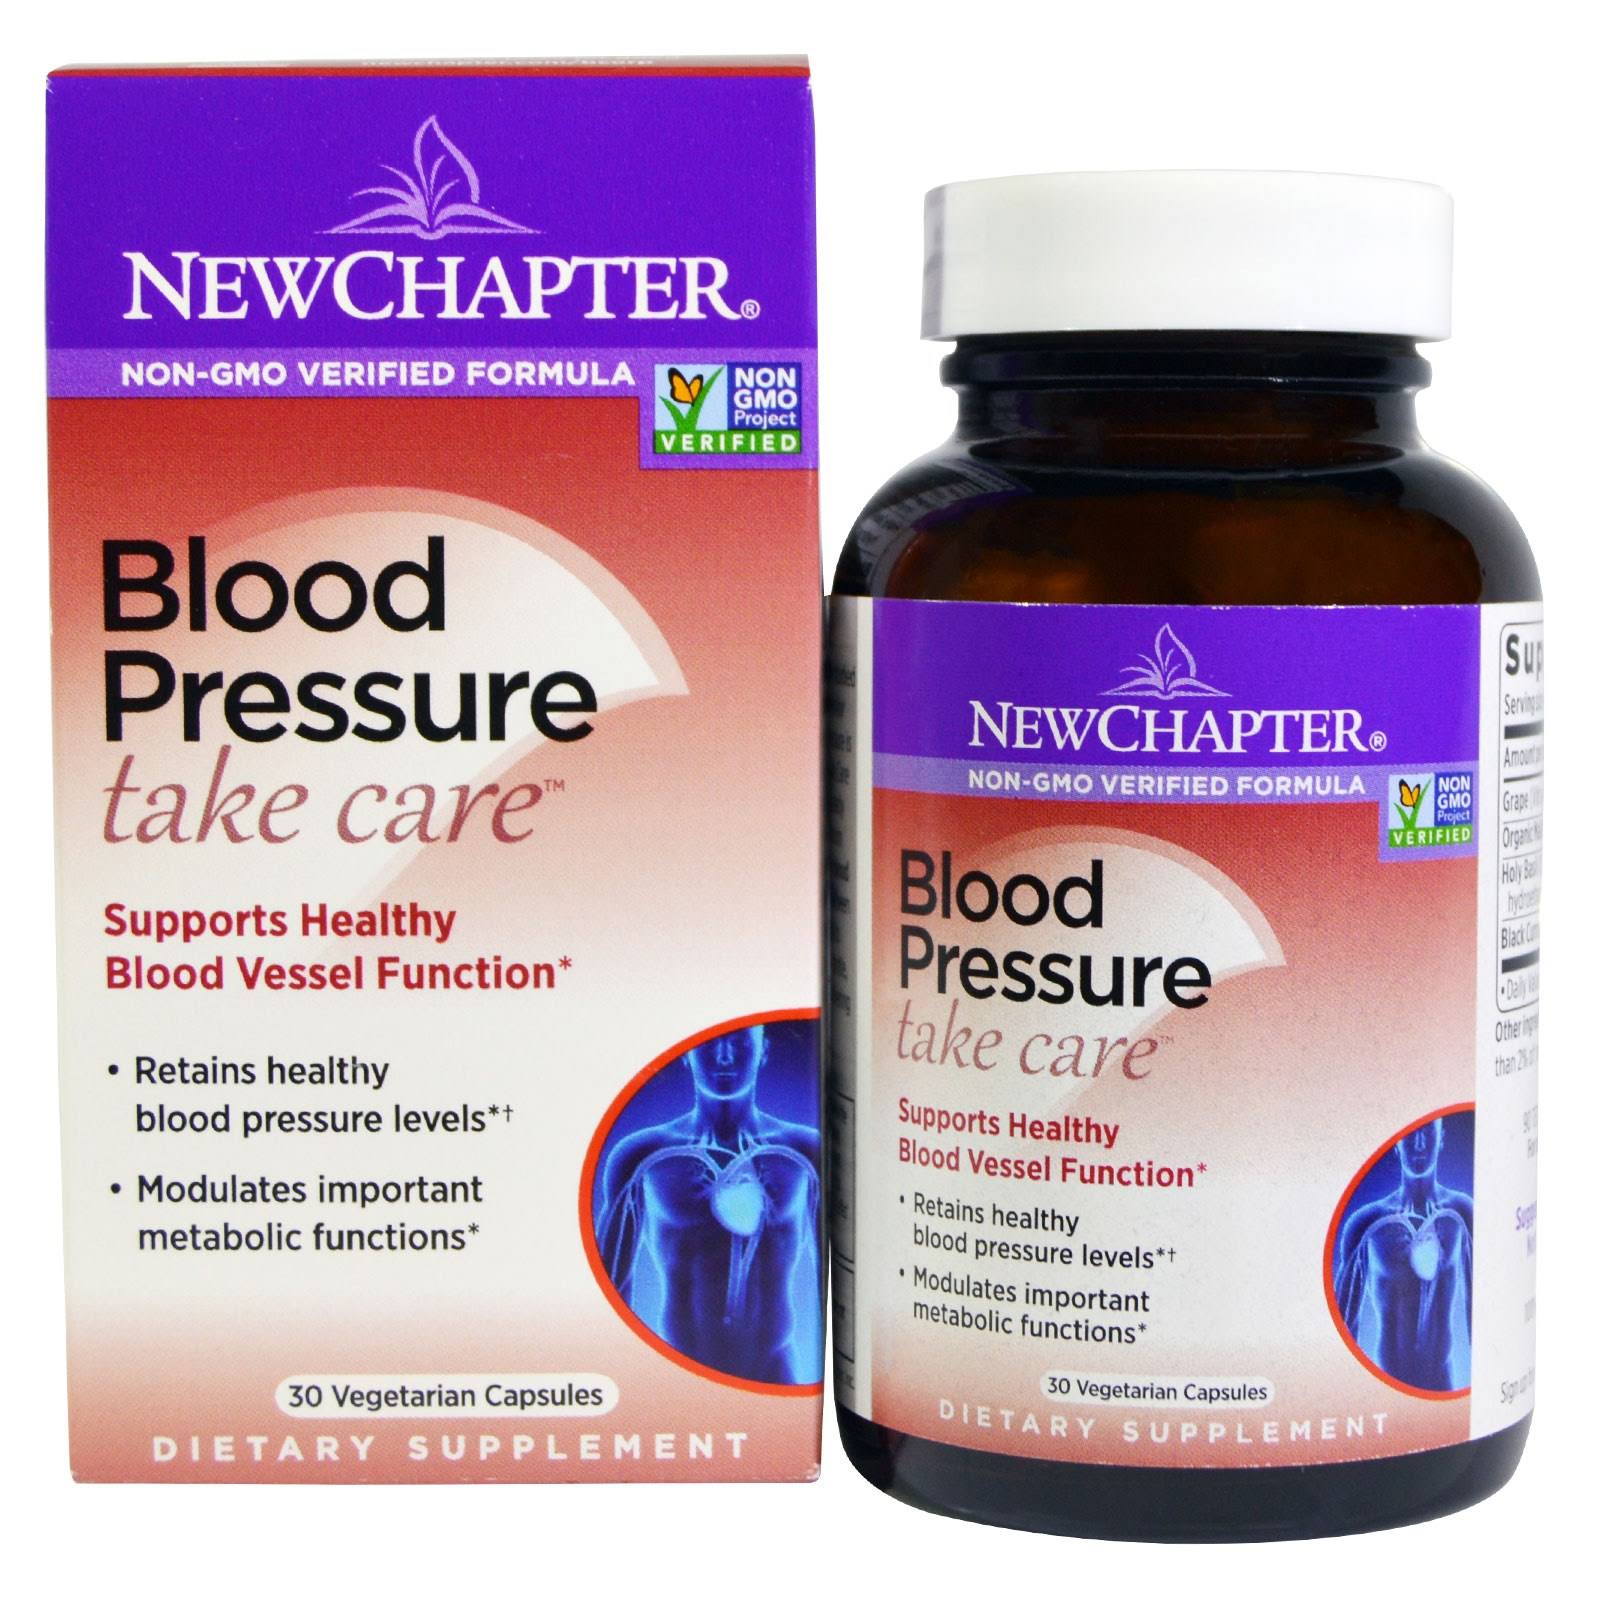 New Chapter Blood Pressure Take Care Supplement